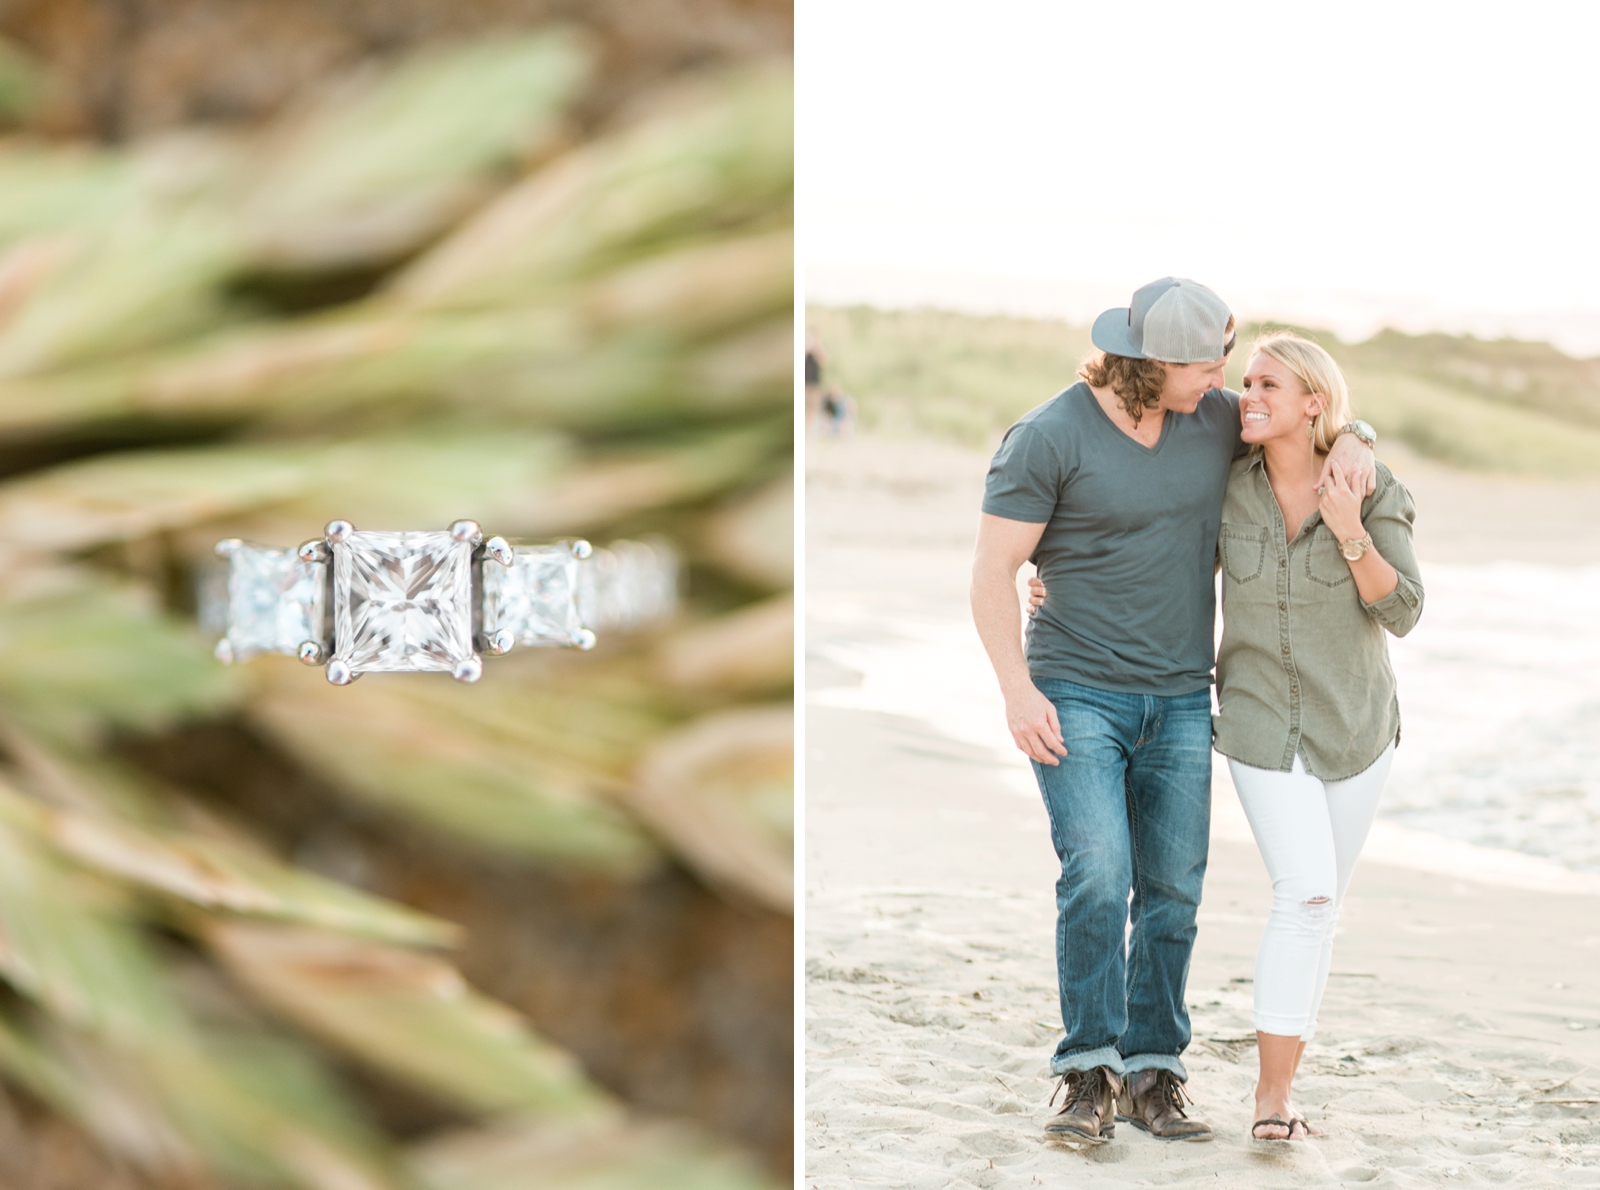 4 tips for planning a unique engagement session by virginia wedding photographer